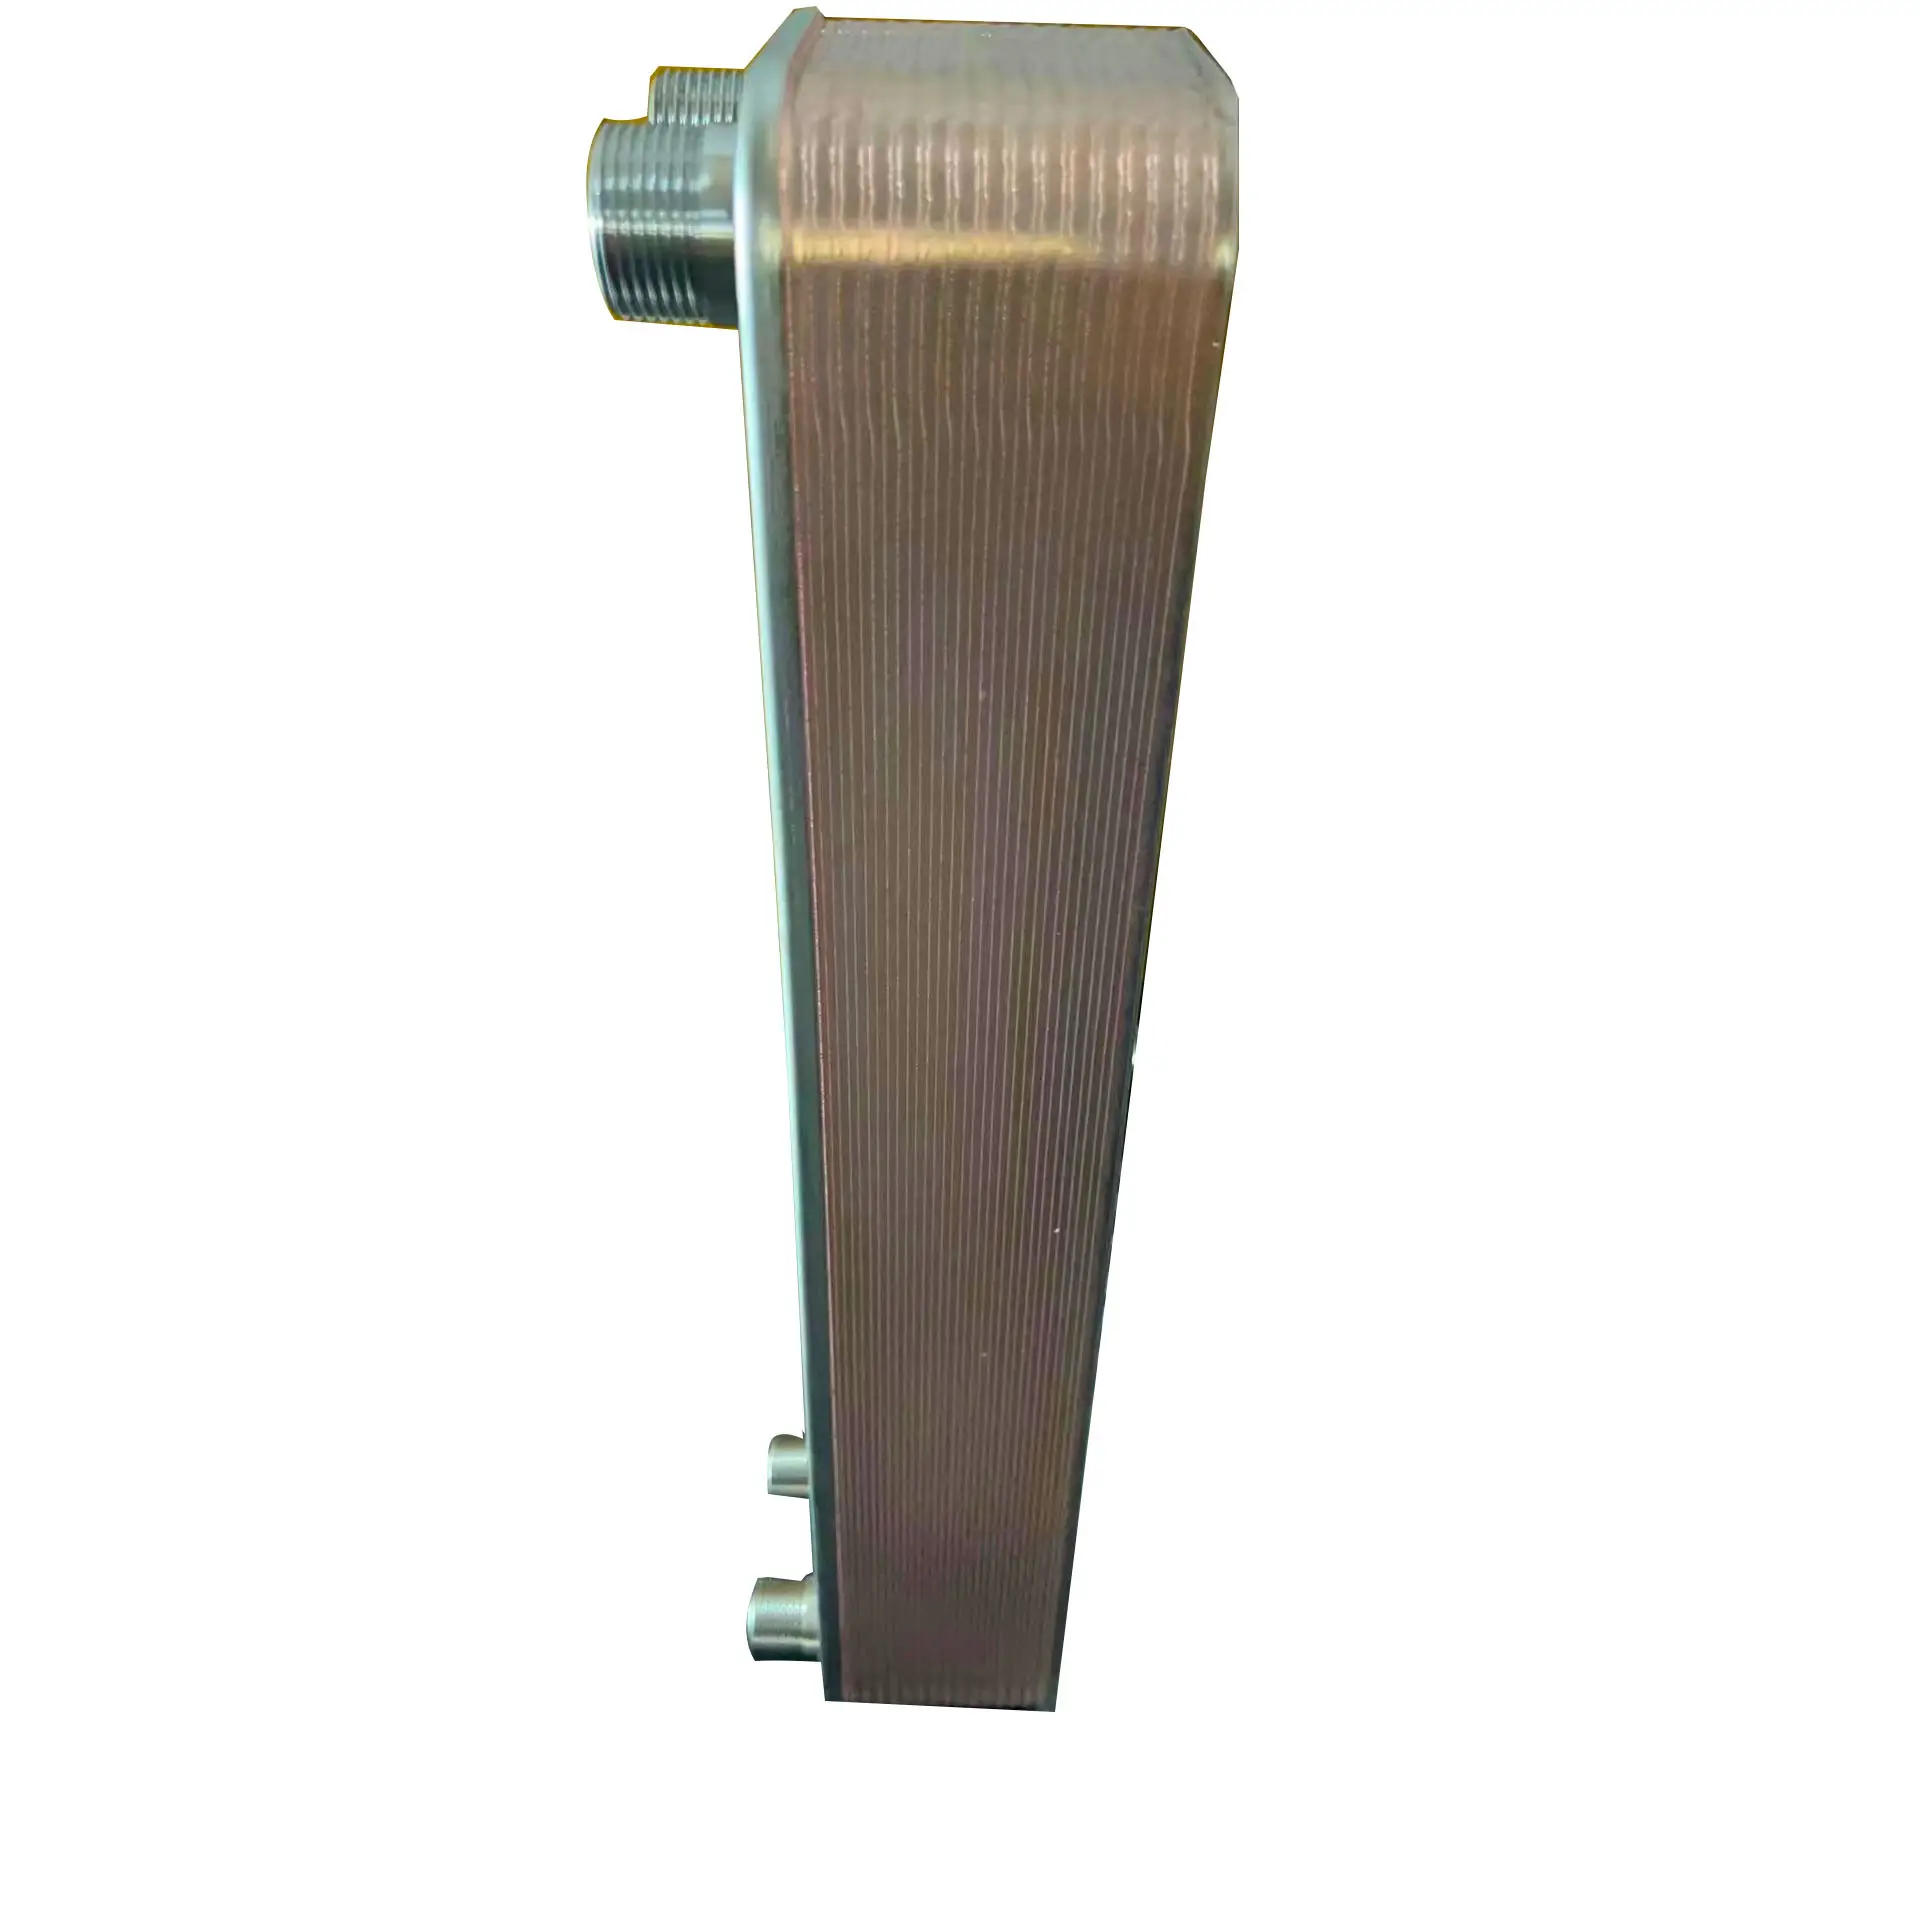 H018 Brazed Plate Heat Exchanger for Air Conditioning and Refrigeration